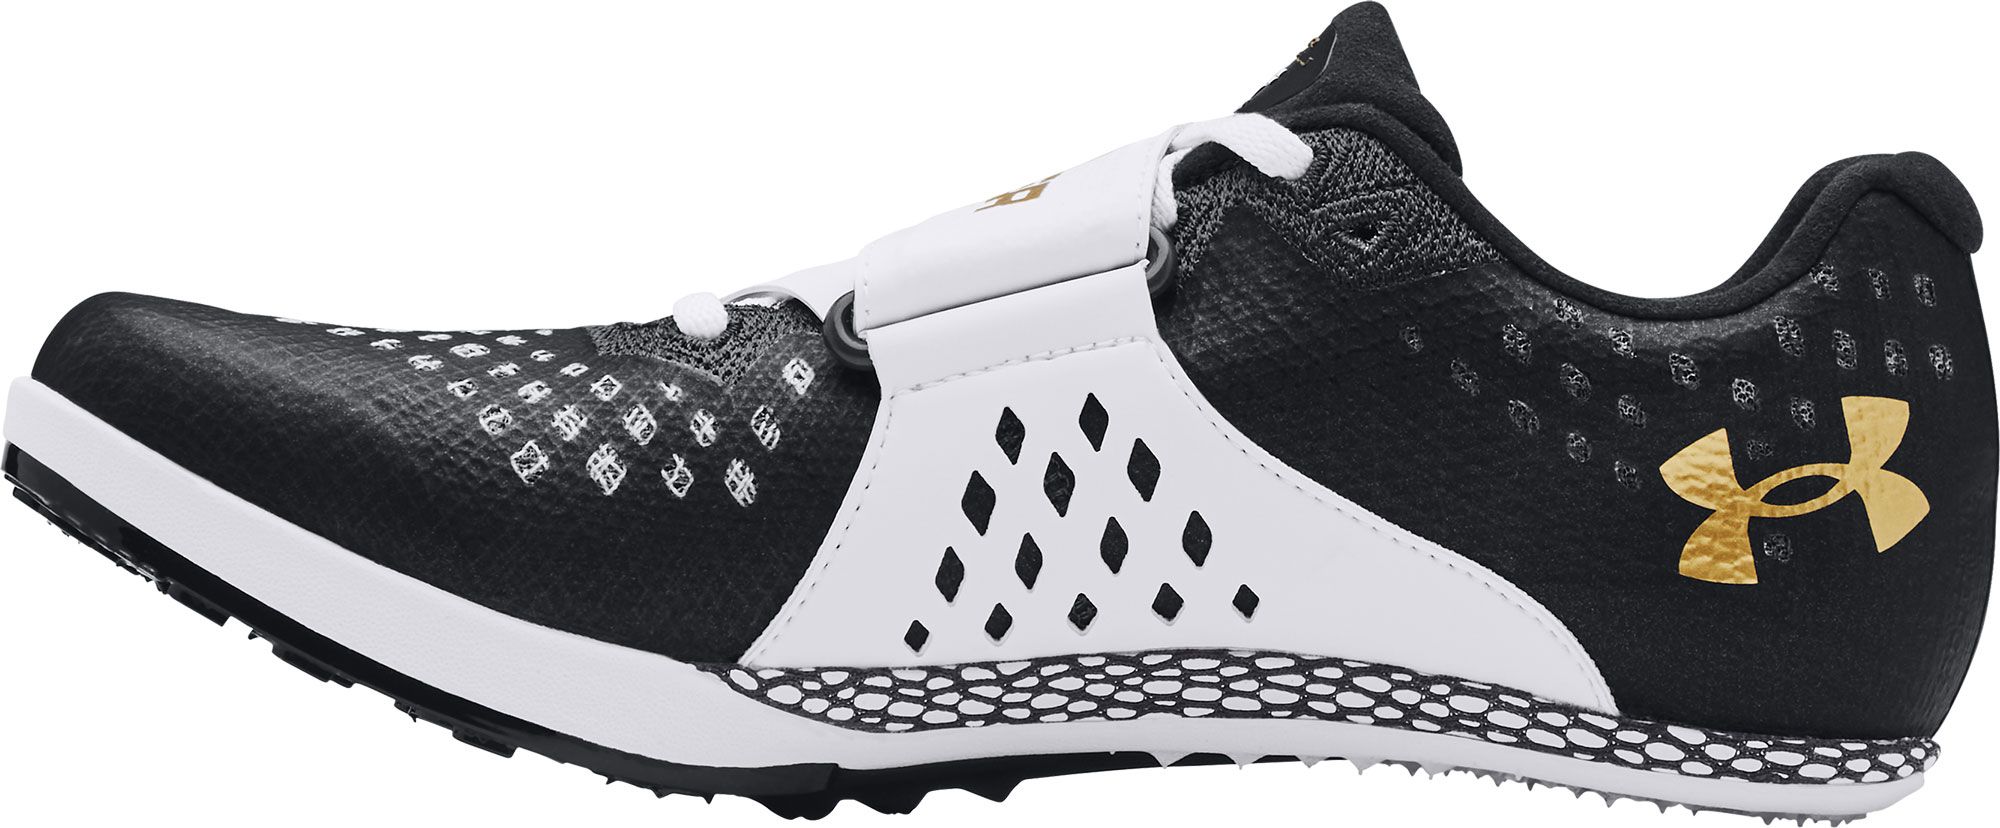 Under Armour HOVR Skyline Long Jump Track and Field Shoes